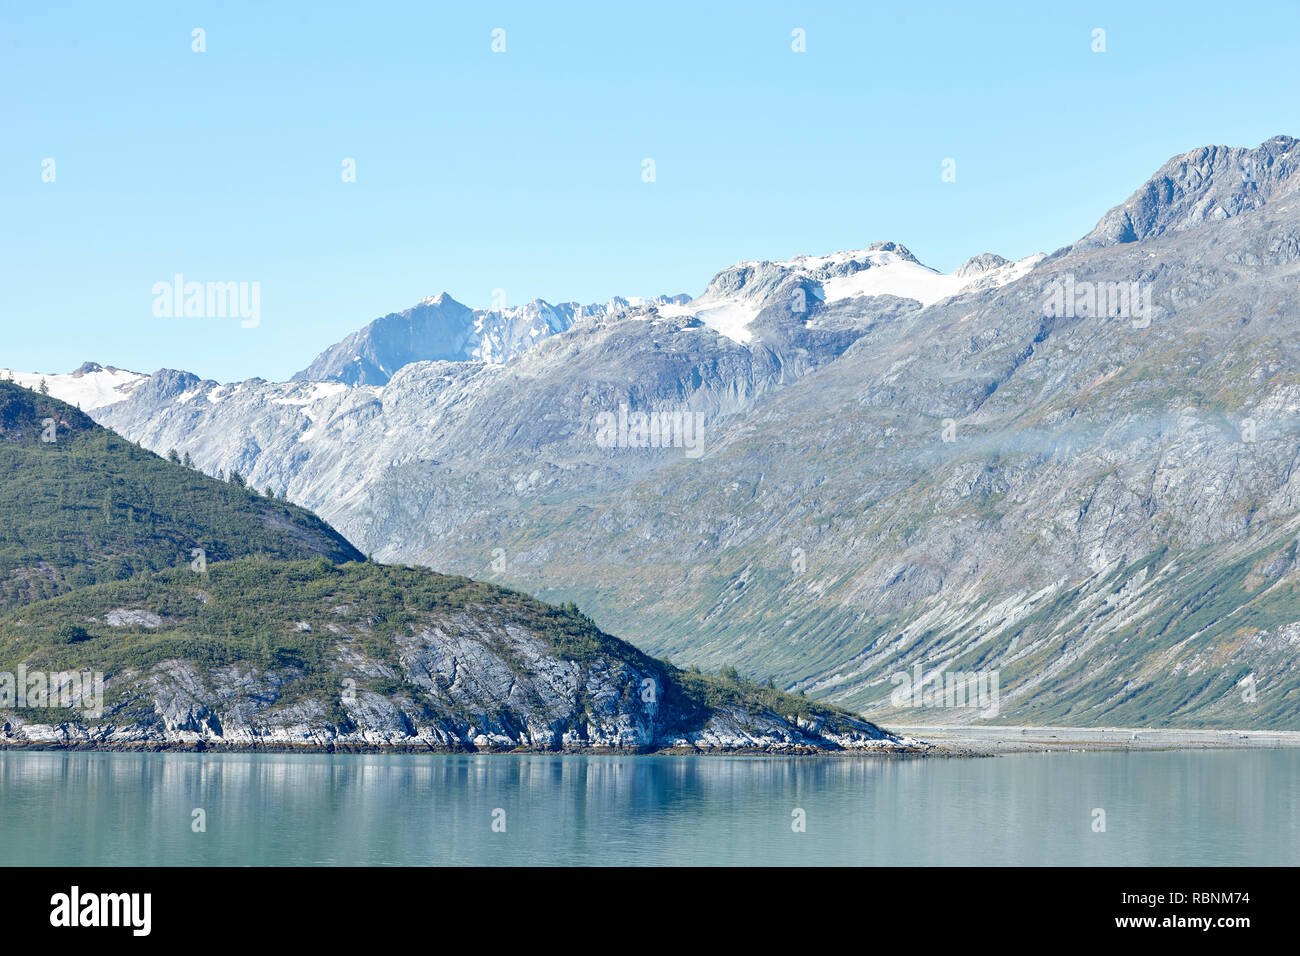 Lake In Alaska Surrounded By Mountains And Forests Stock Photo